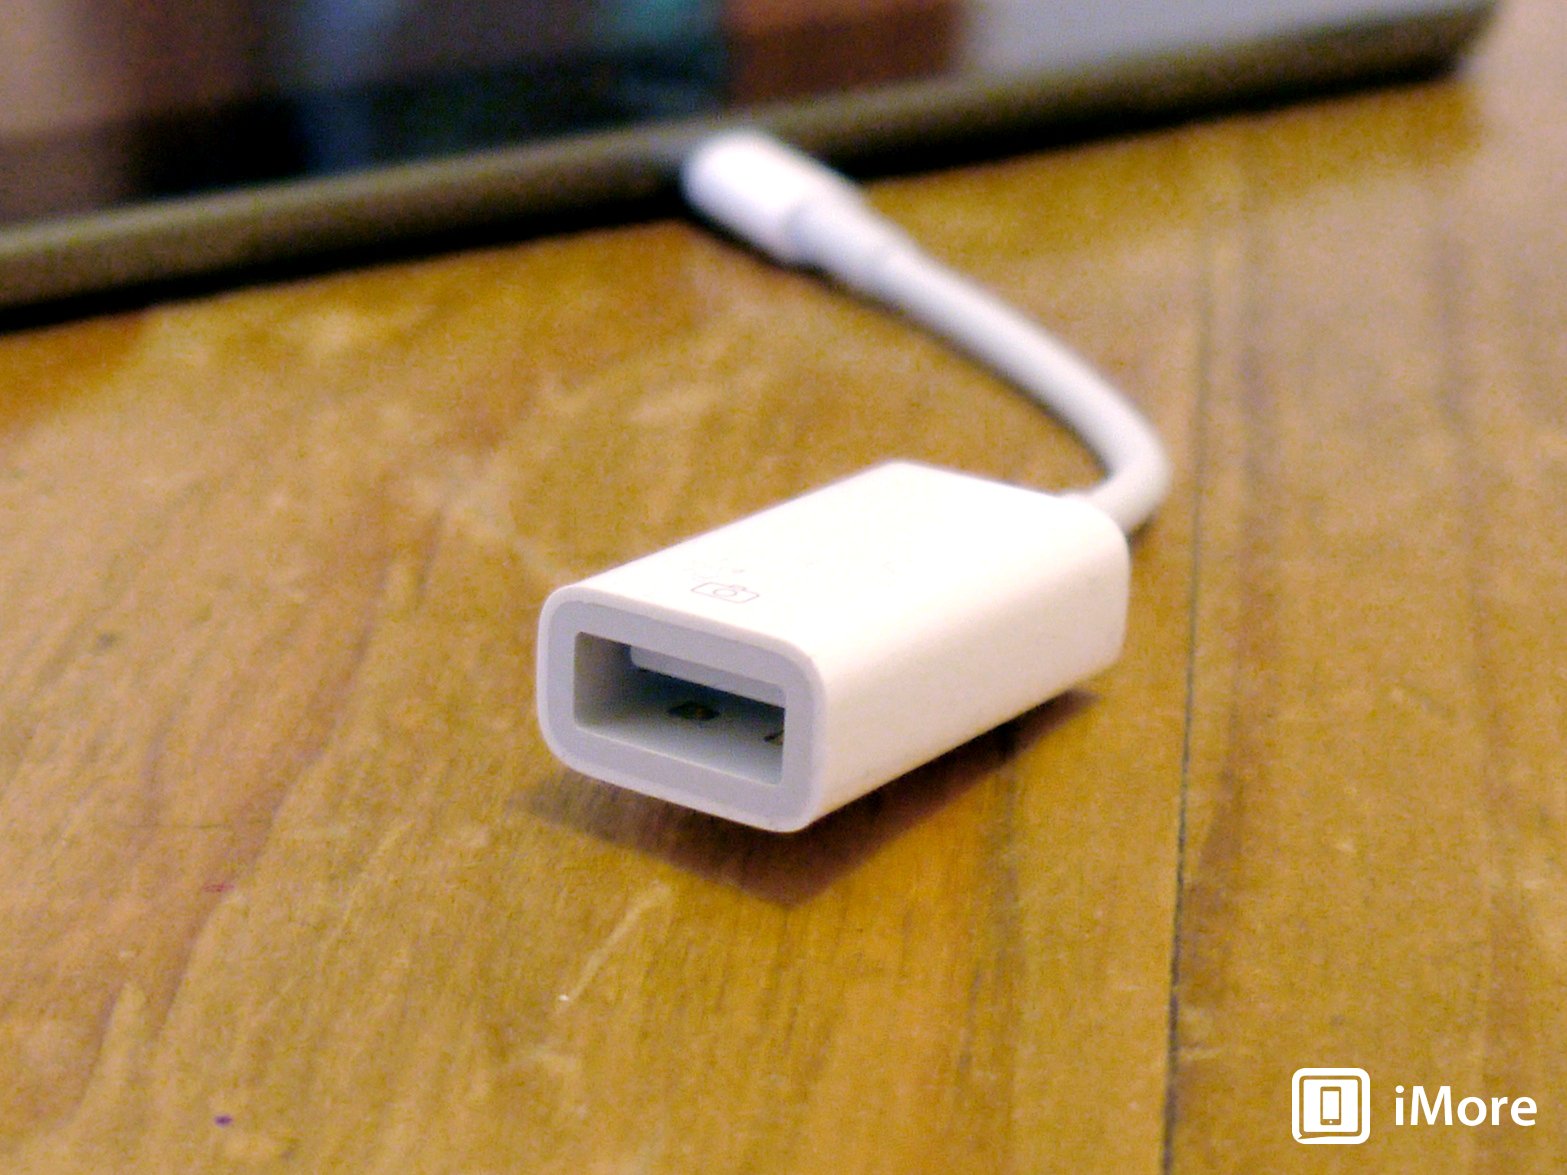 Going beyond cameras with the Apple Lightning to USB adapter | iMore